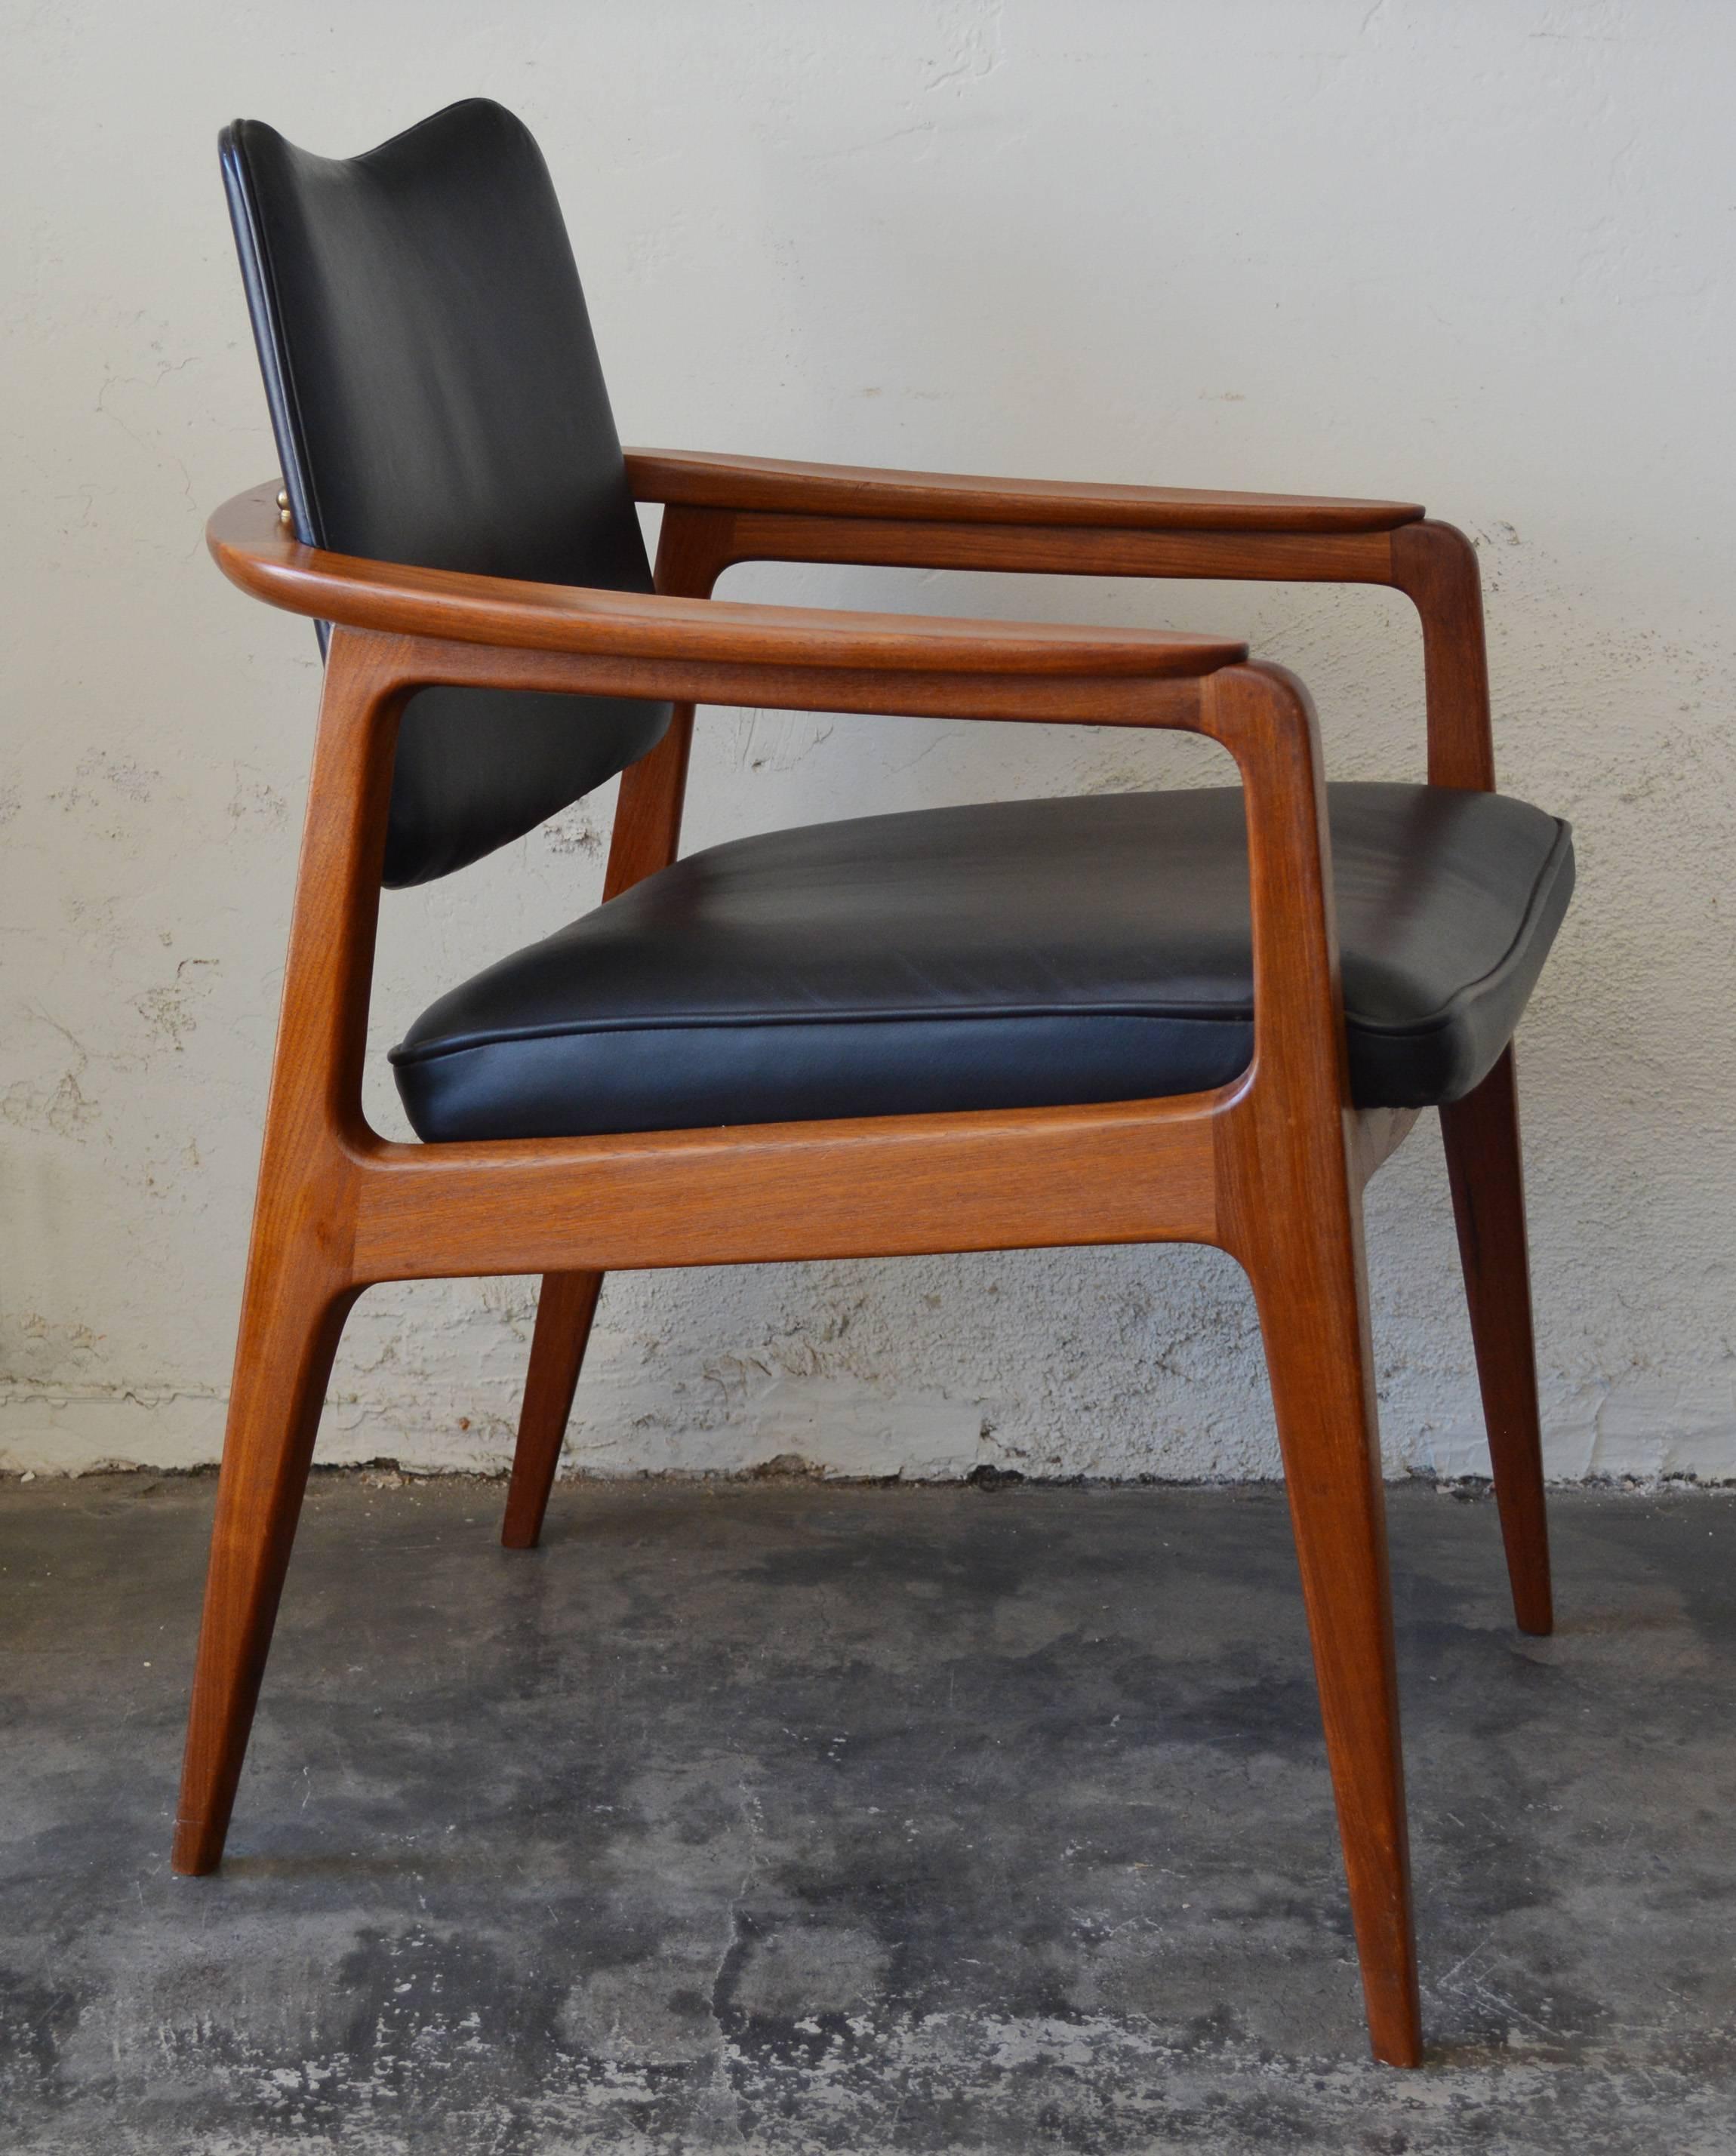 Mid-Century teak and leather armchair designed by Sigvard Bernadotte for France & Daverkosen and imported by John Stuart. This chair has a back that tilts. It is signed with the France & Daverkosen stamp and a John Stuart label.